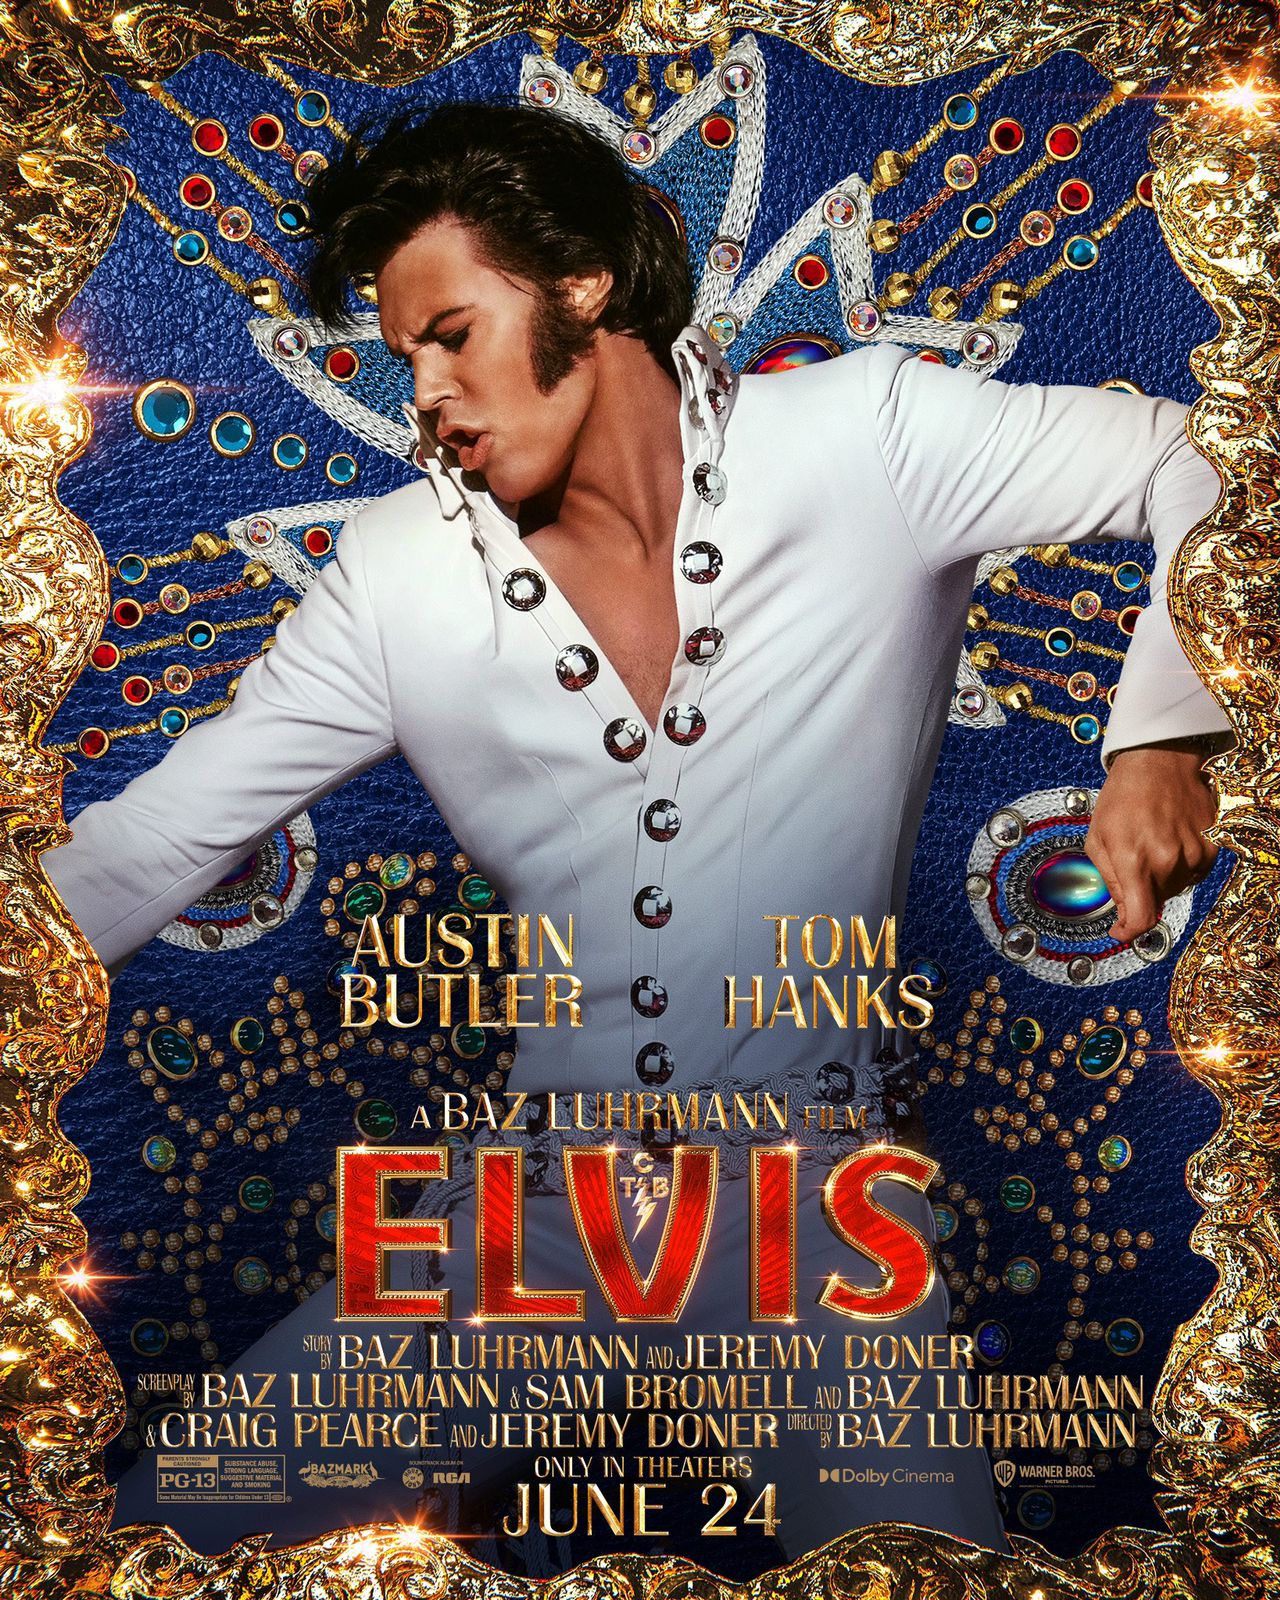 New 'Elvis' posters released Check out the details of the new